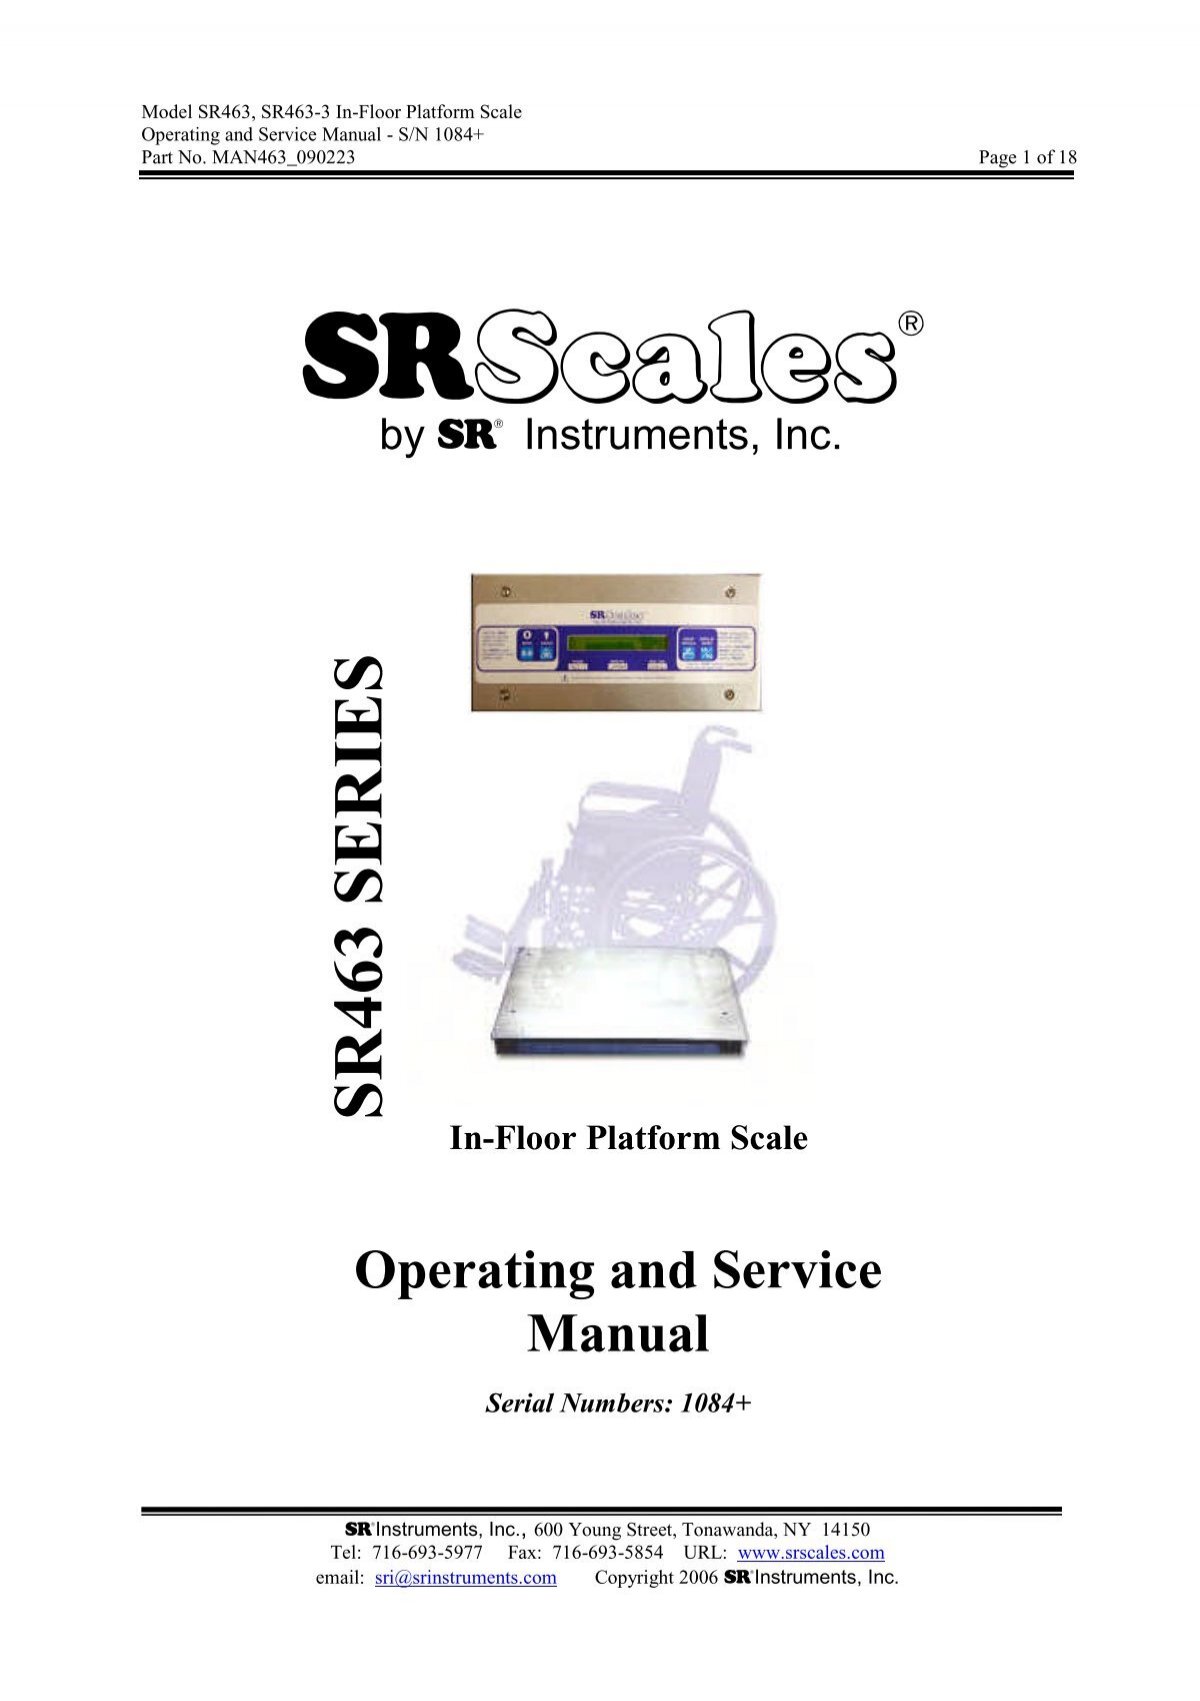 SR Scales SR555i Digital Stand-on Scale